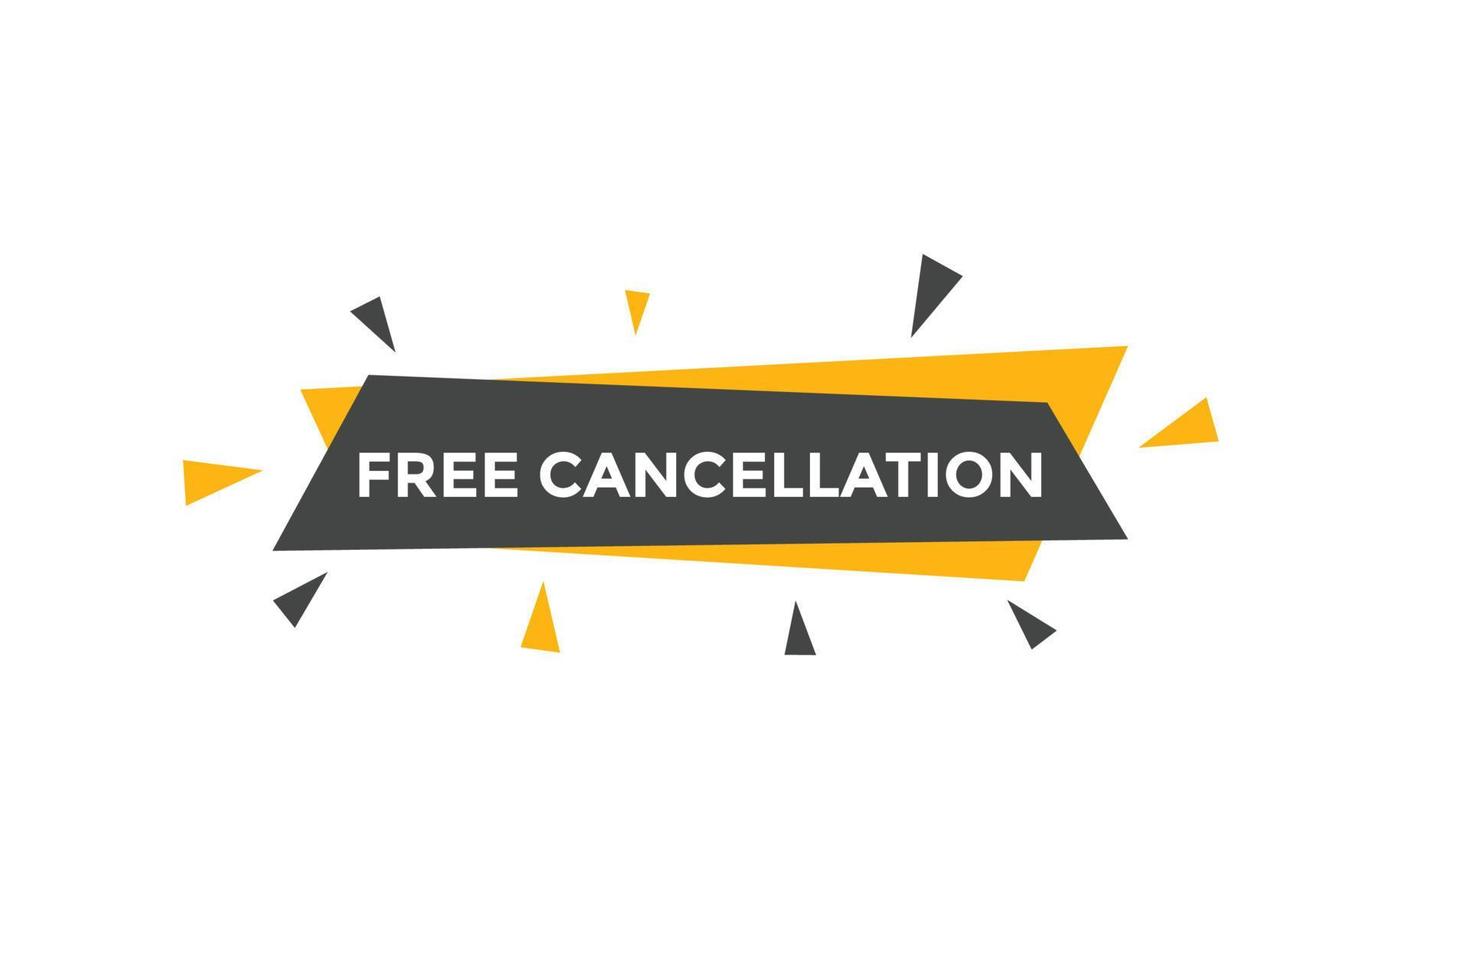 Free Cancellation button.  Free Cancellation speech bubble. Free Cancellation banner label template vector